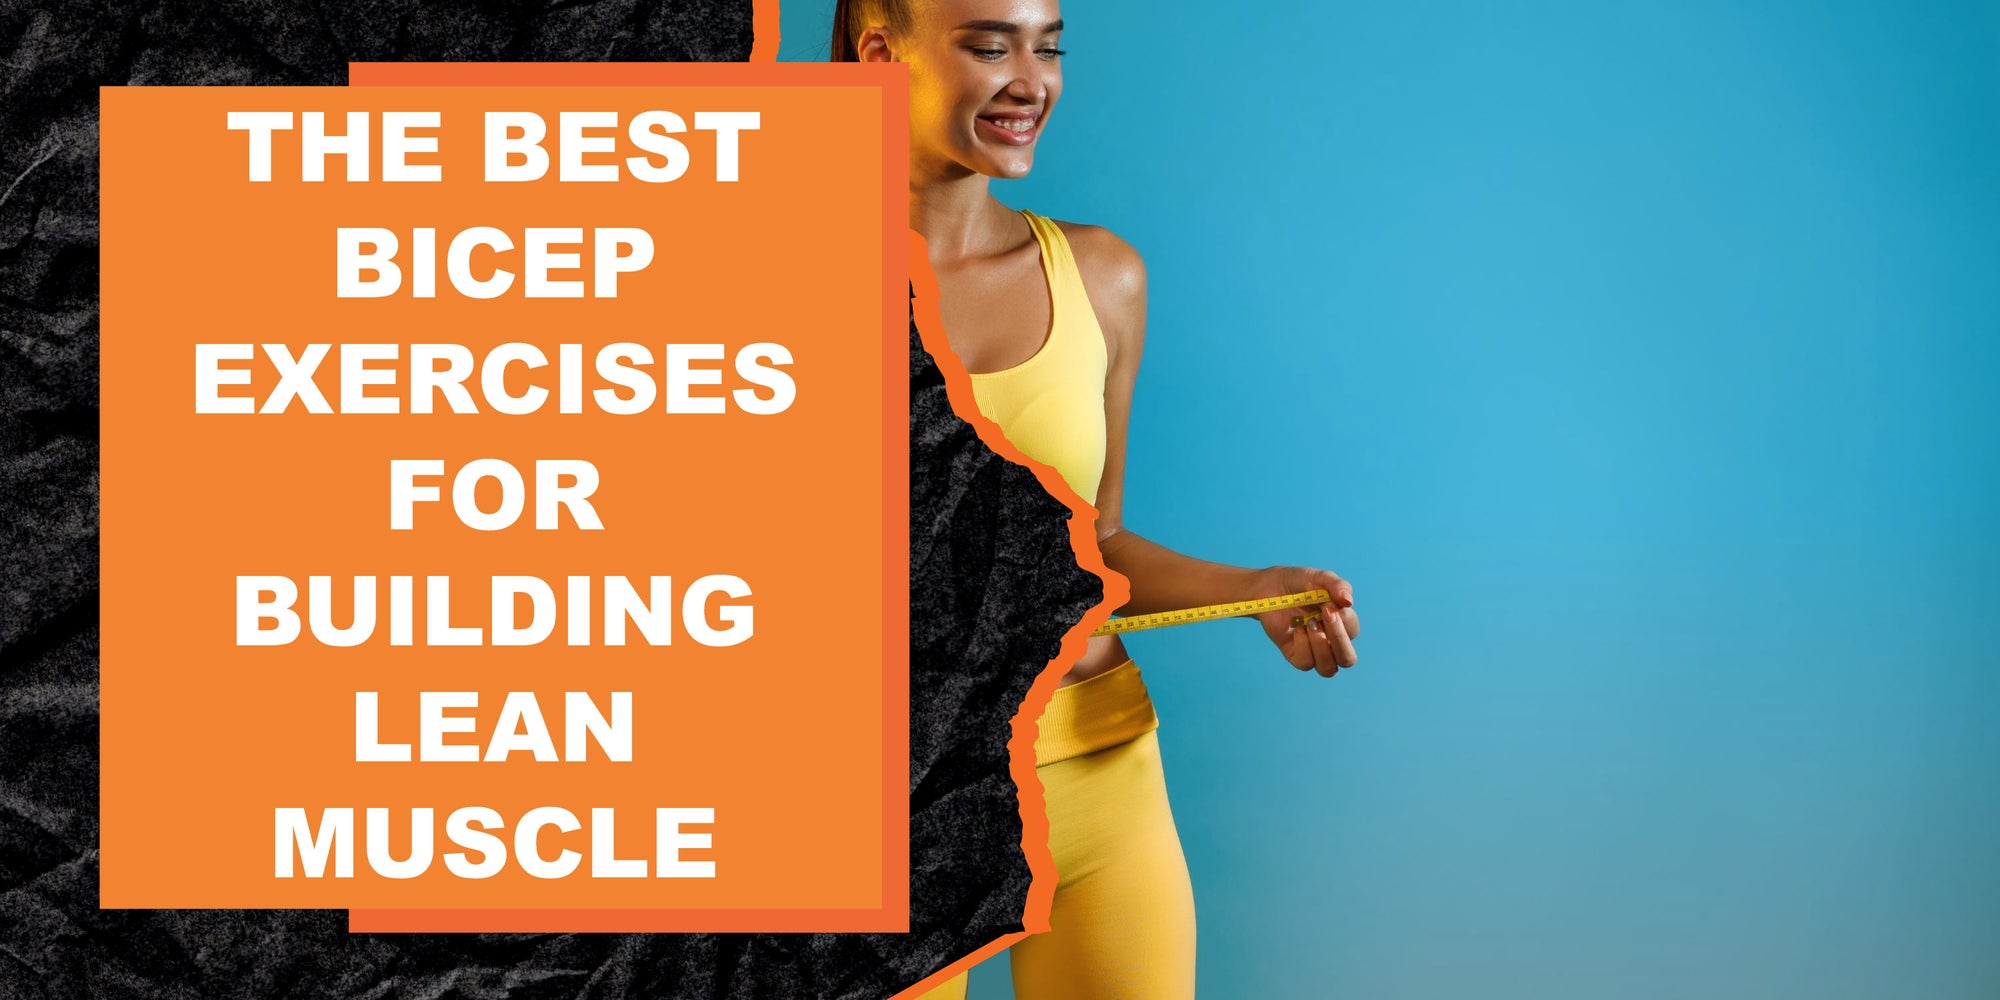 The Best Bicep Exercises for Building Lean Muscle